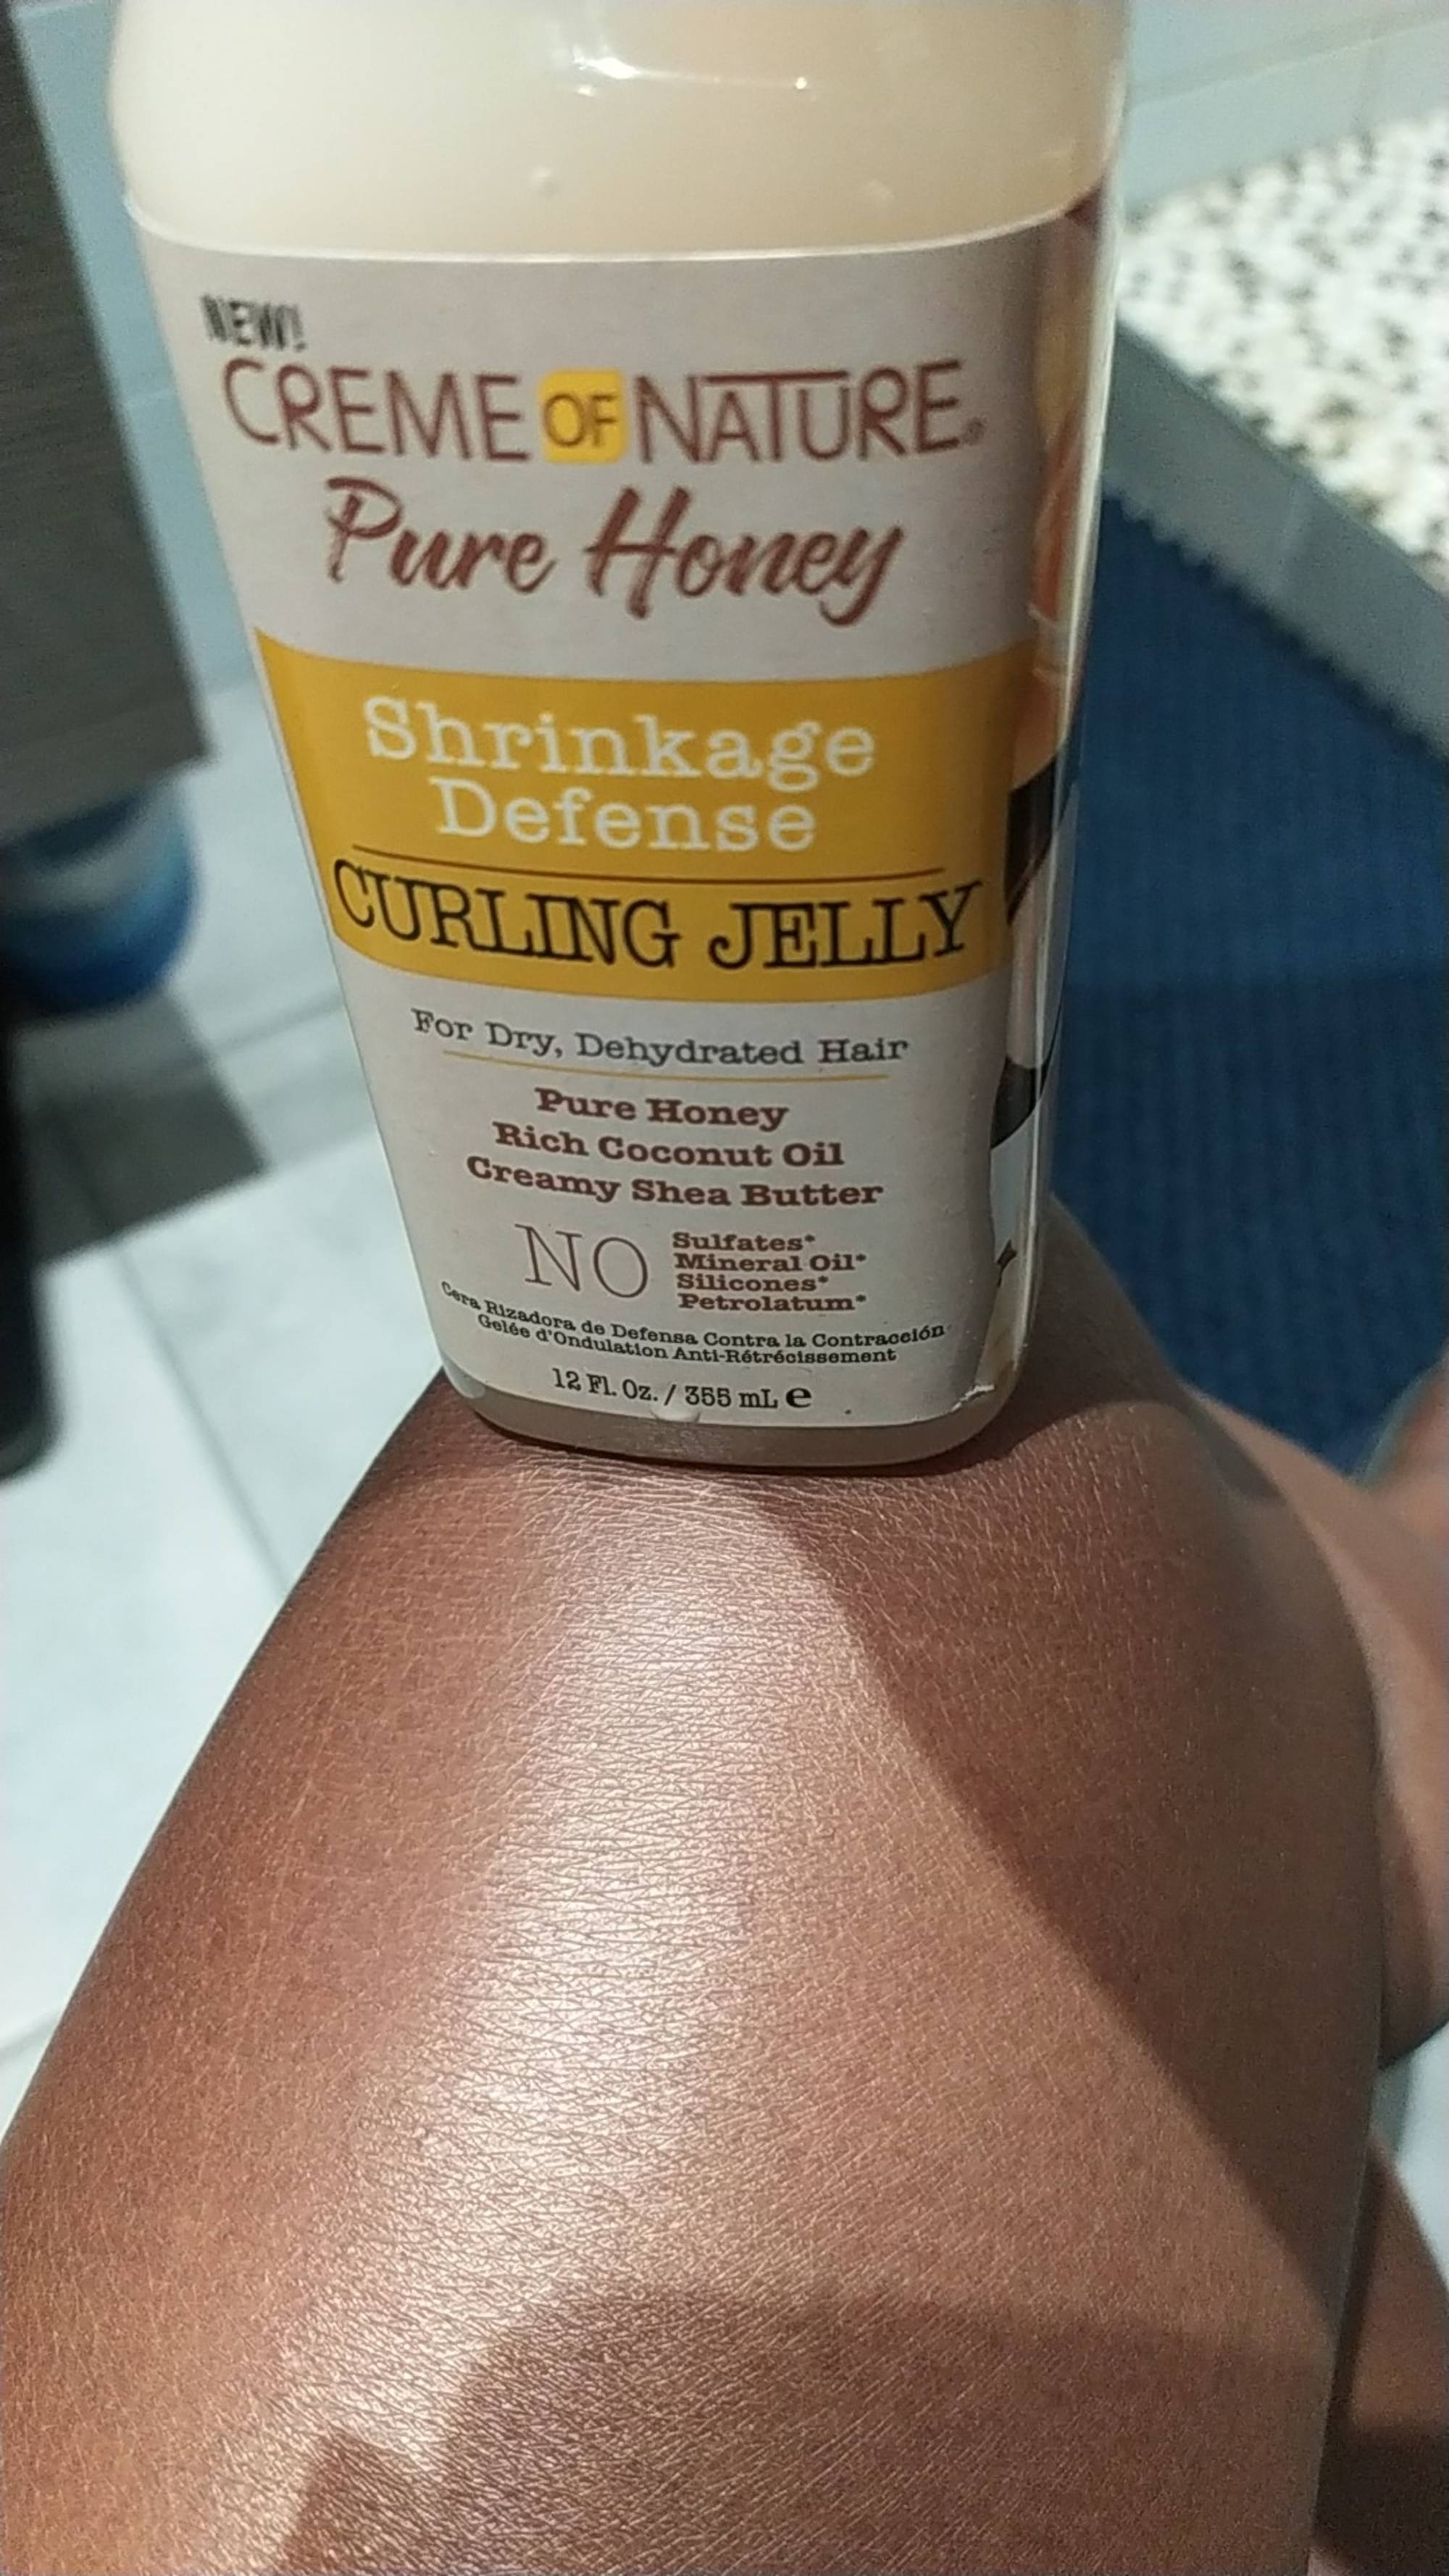 CREME OF NATURE - Pure honey - Shrinkage defense curling jelly